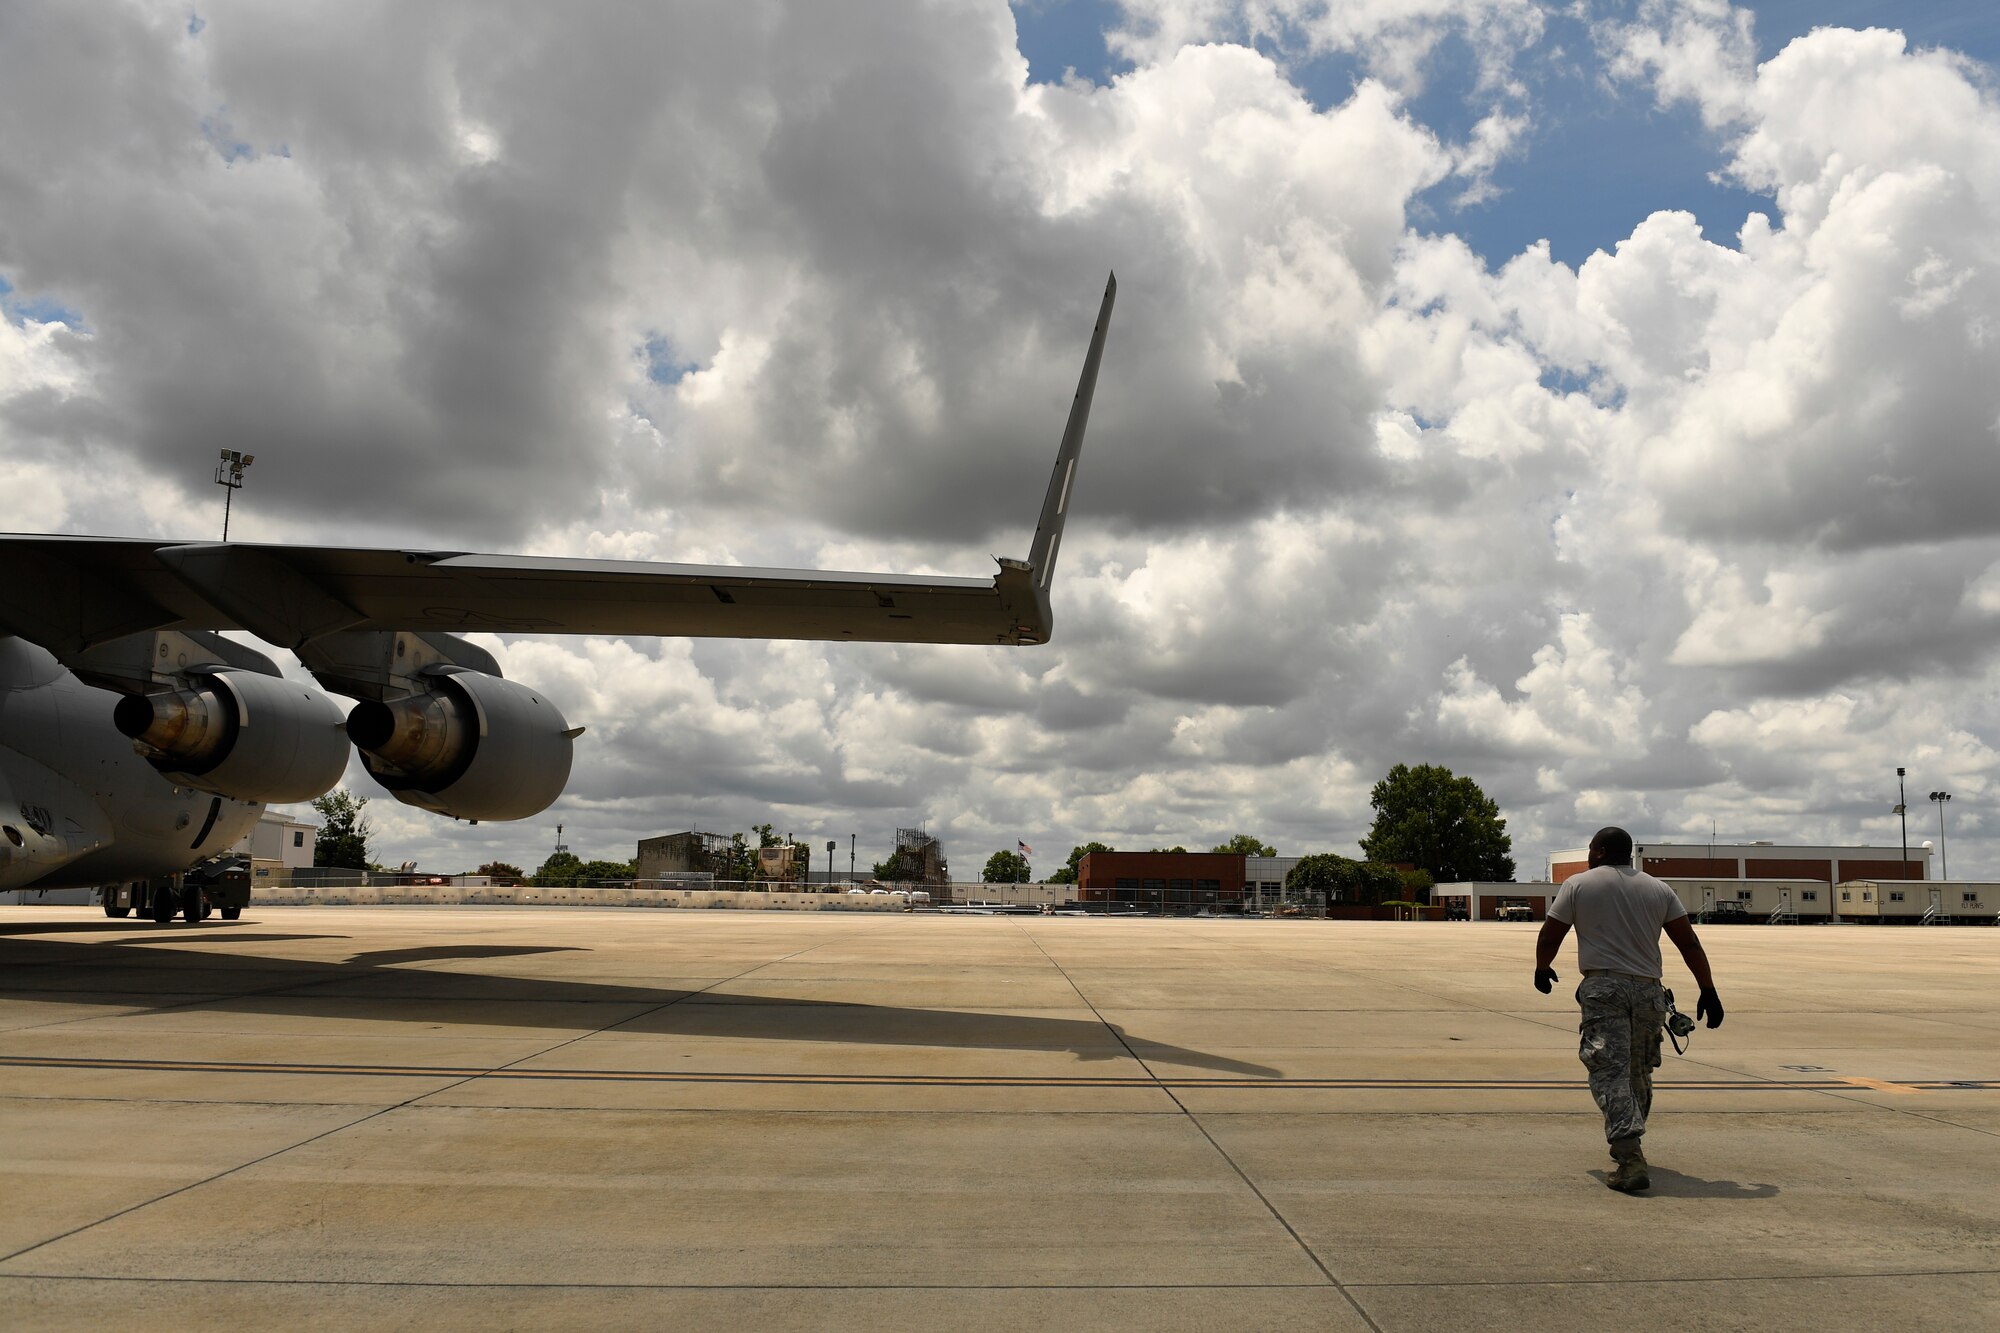 U.S. Air Force Senior Airman Nicklaus Moore, 145th Aircraft Maintenance Squadron, looks for any potential wing hazards while a C-17 Globemaster III is towed at the North Carolina Air National Guard Base, Charlotte Douglas International Airport, July 24, 2018. Moore is responsible to ensure the aircraft wing is clear throughout the towing process.